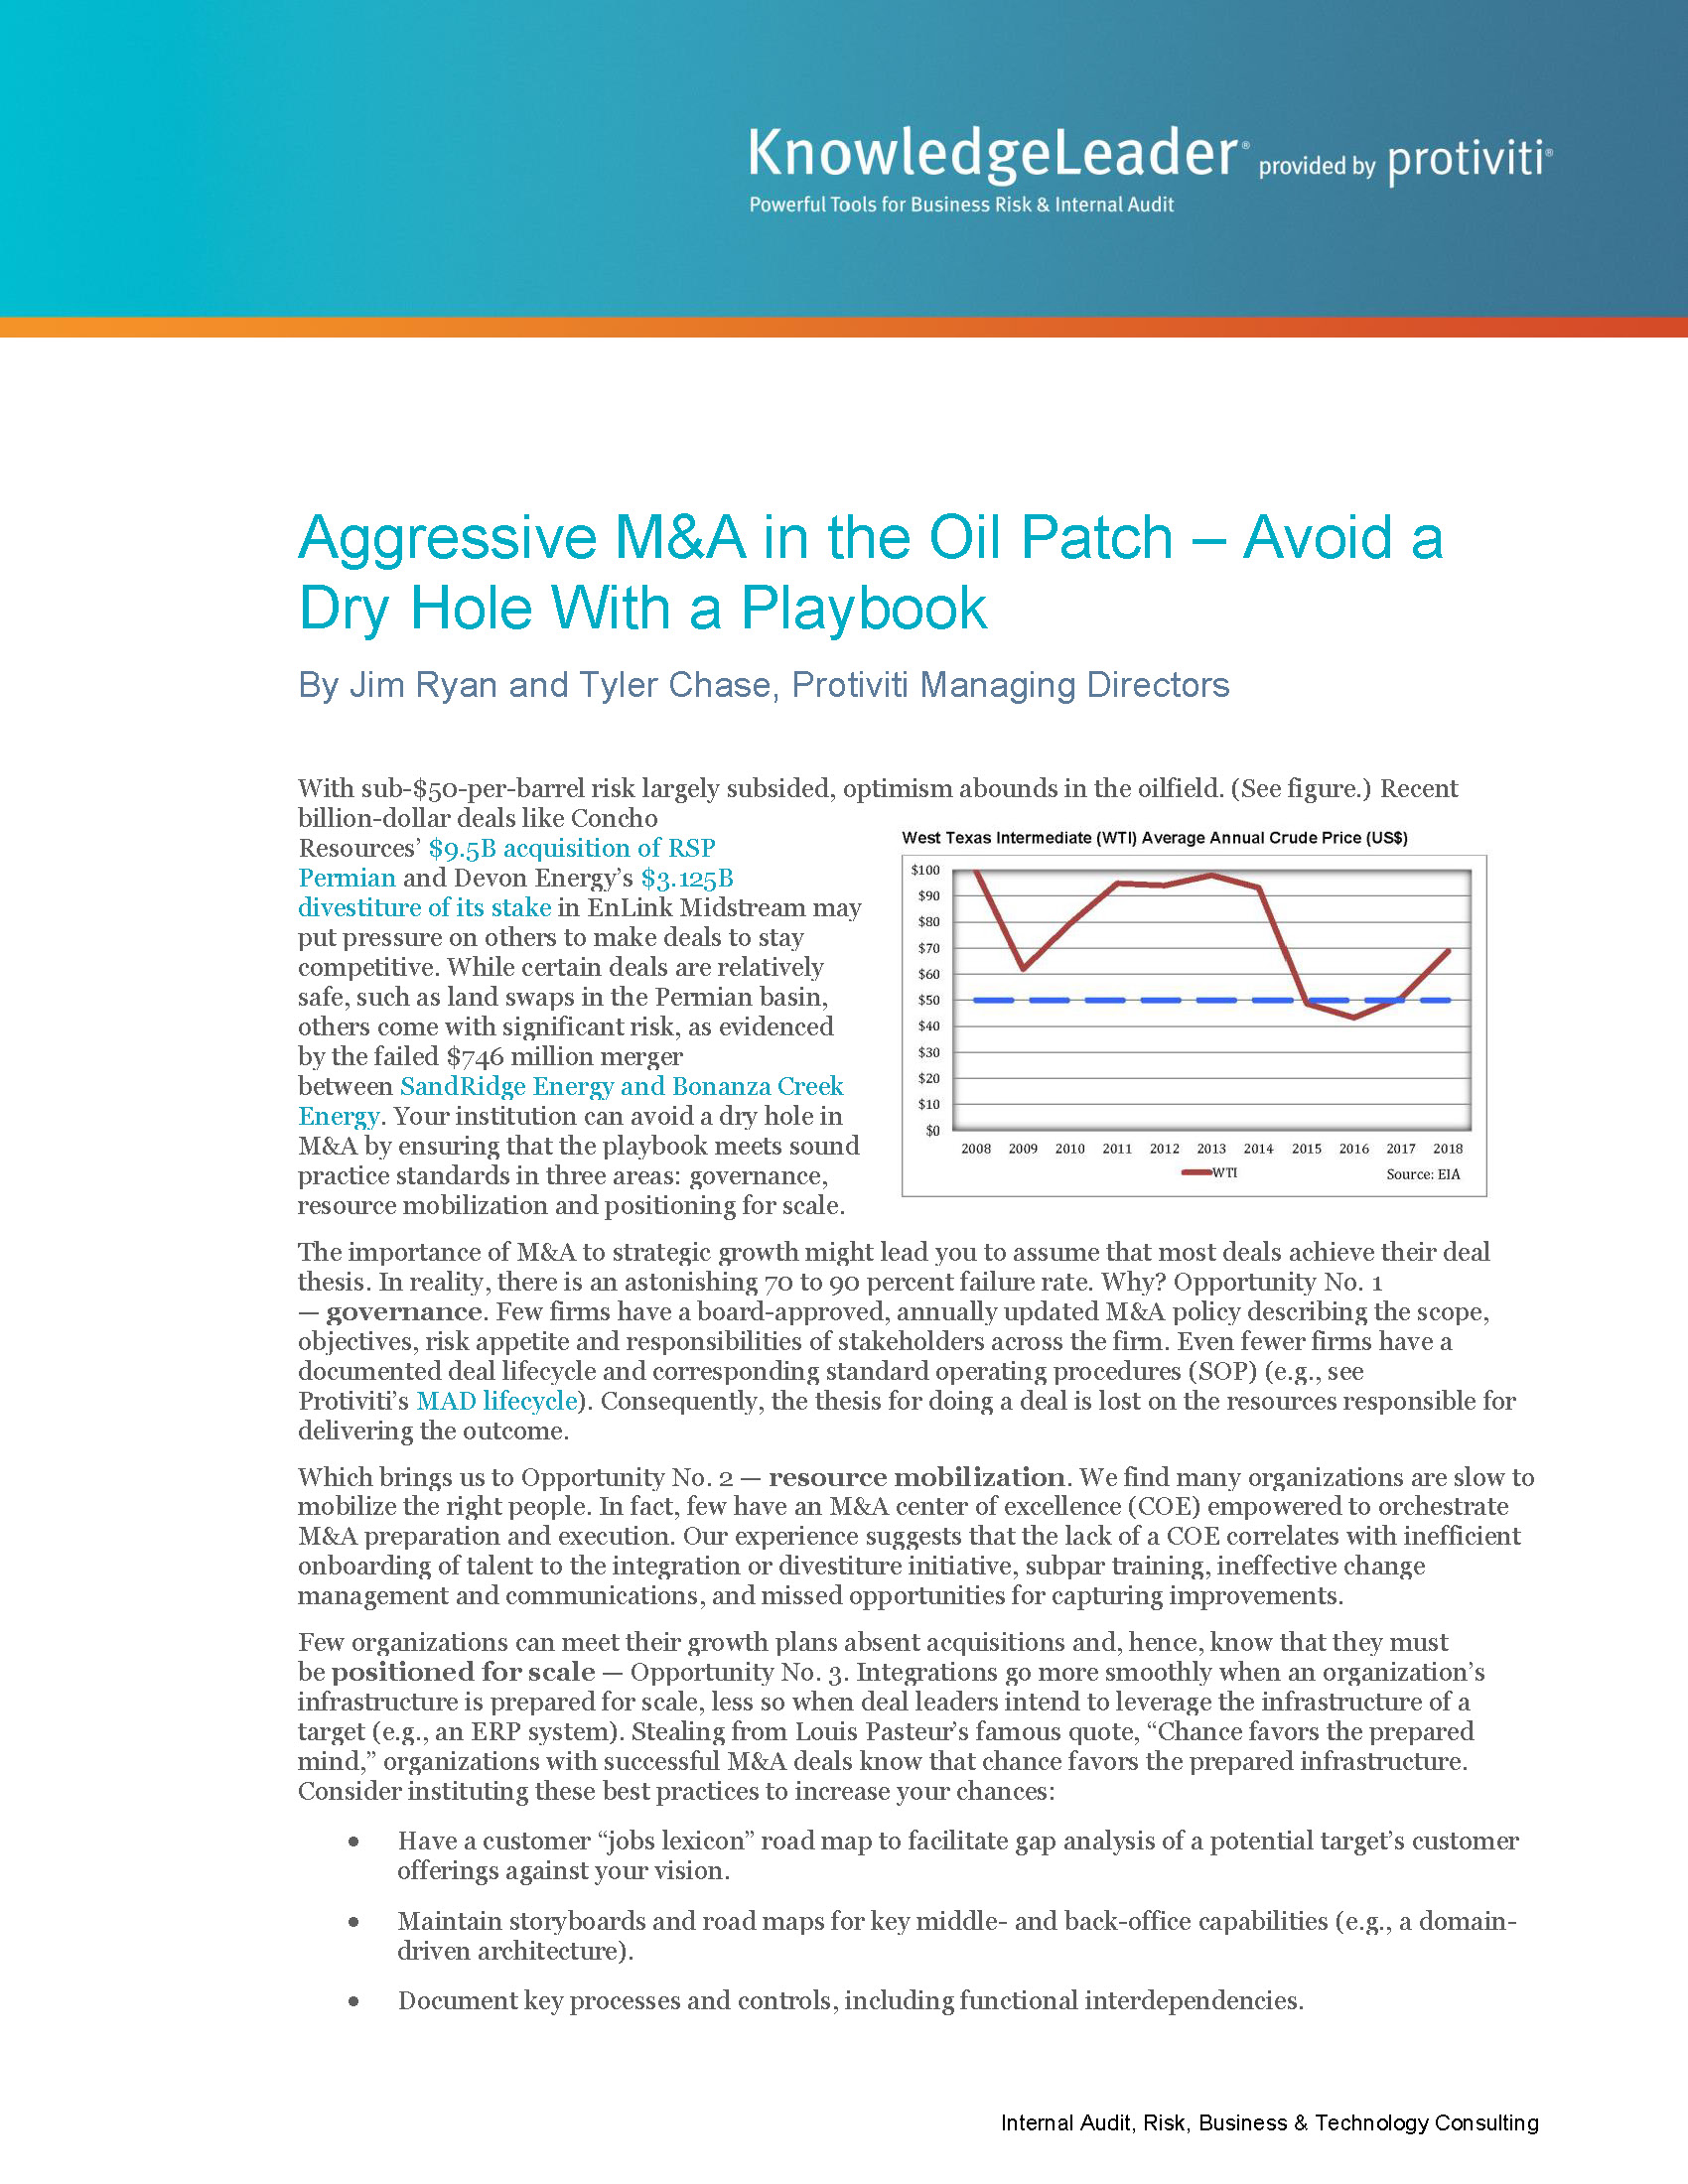 Screenshot of the first page of Aggressive M&A in the Oil Patch — Avoid a Dry Hole With a Playbook